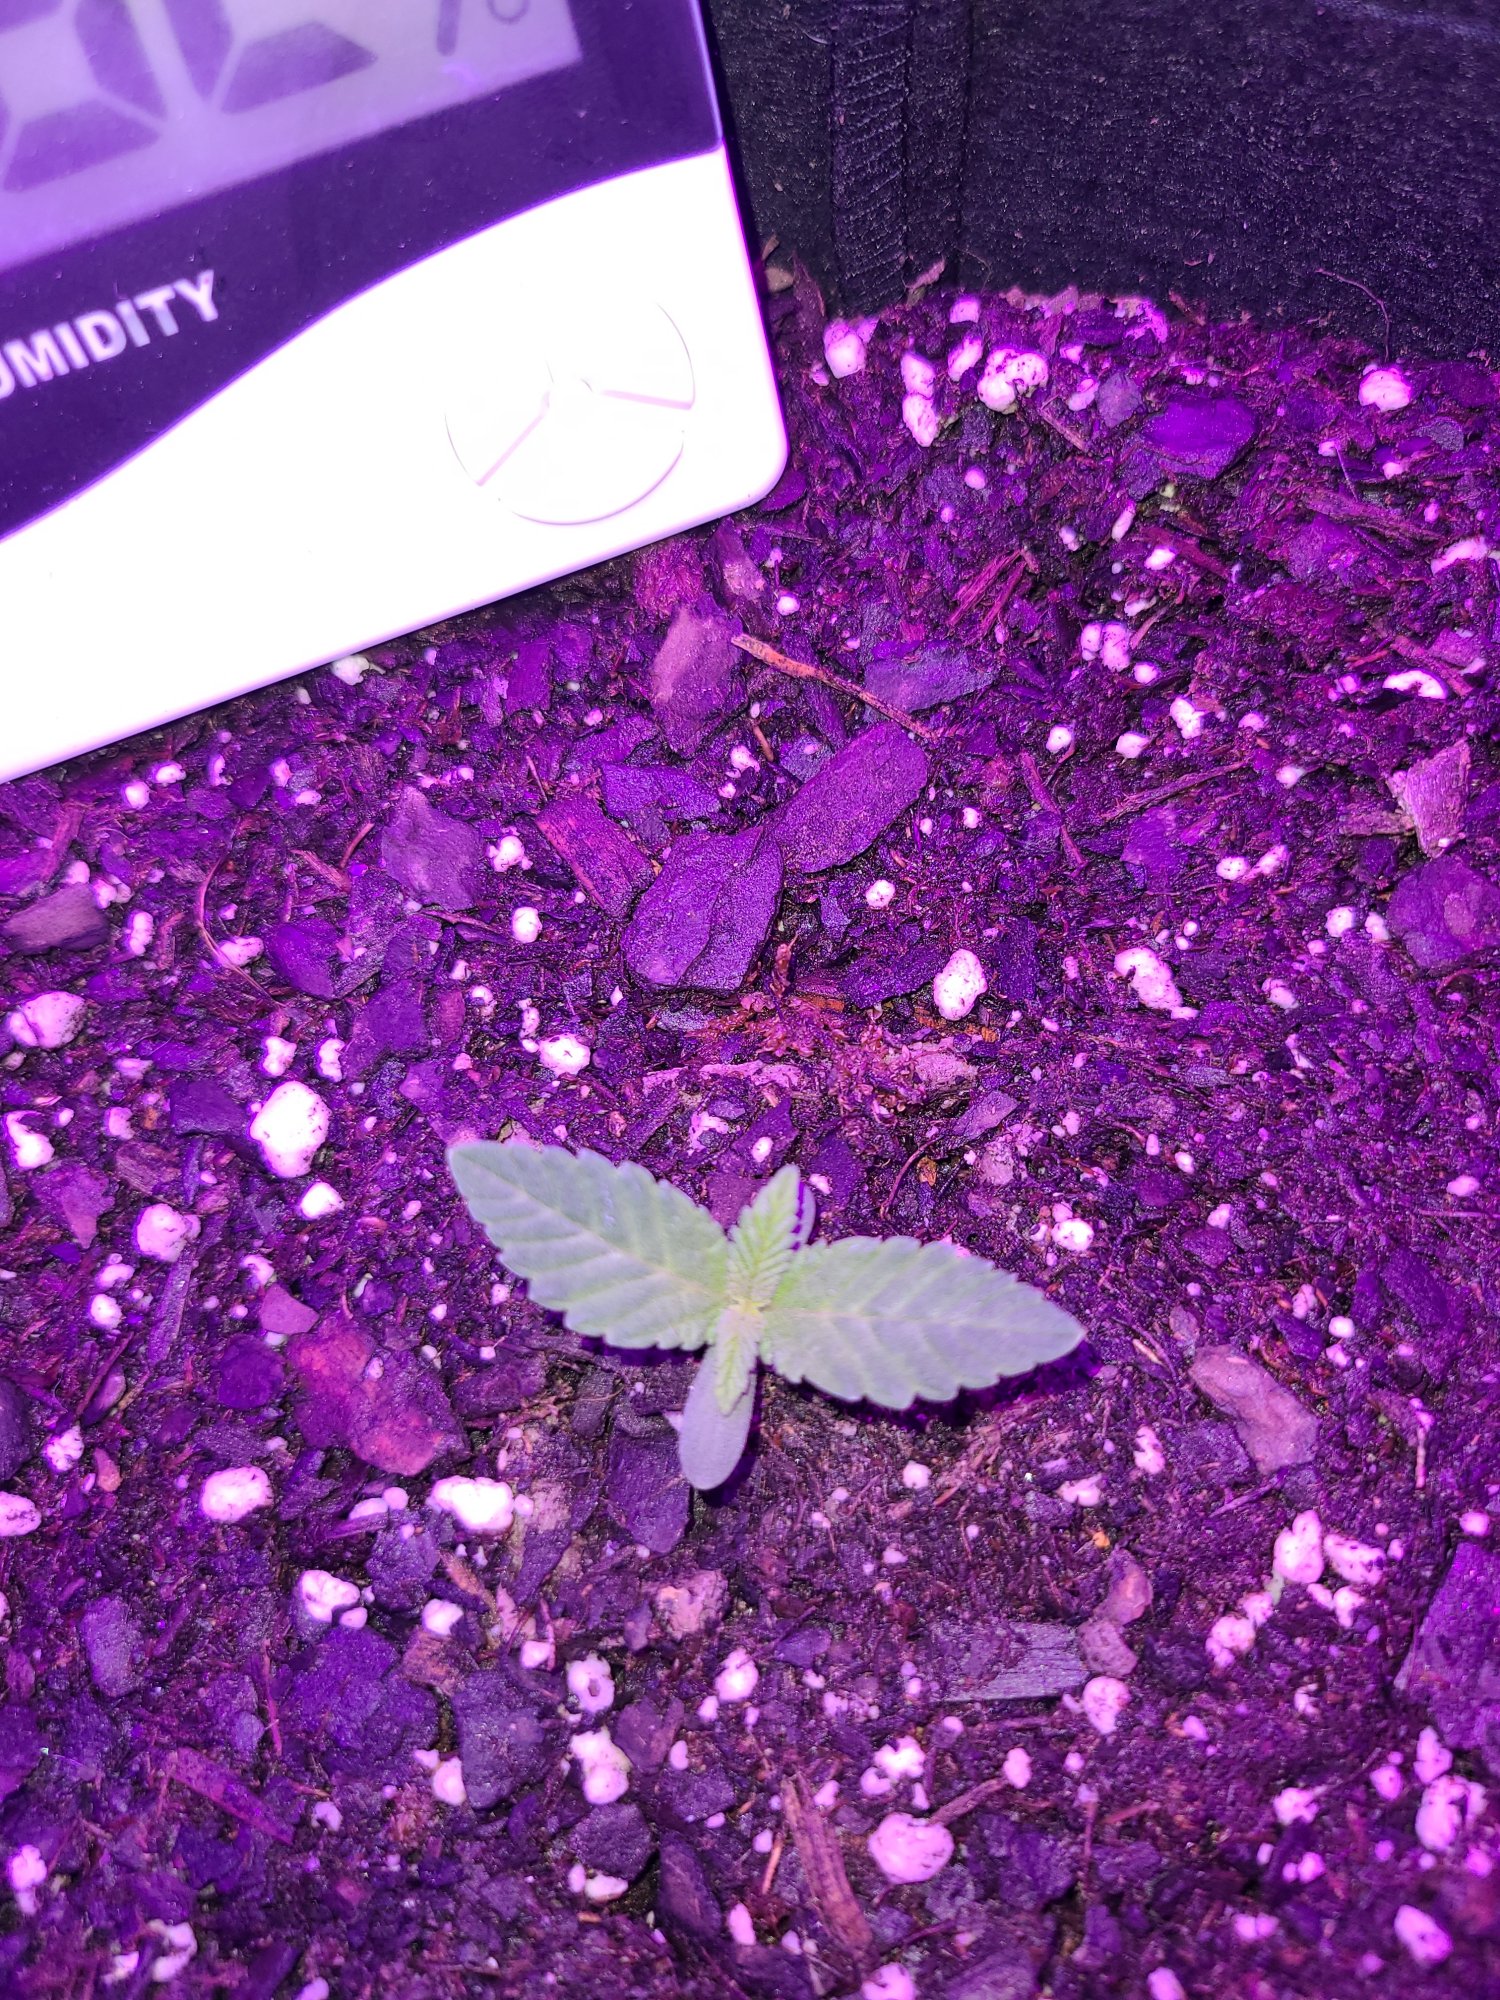 Does she look normal new grower